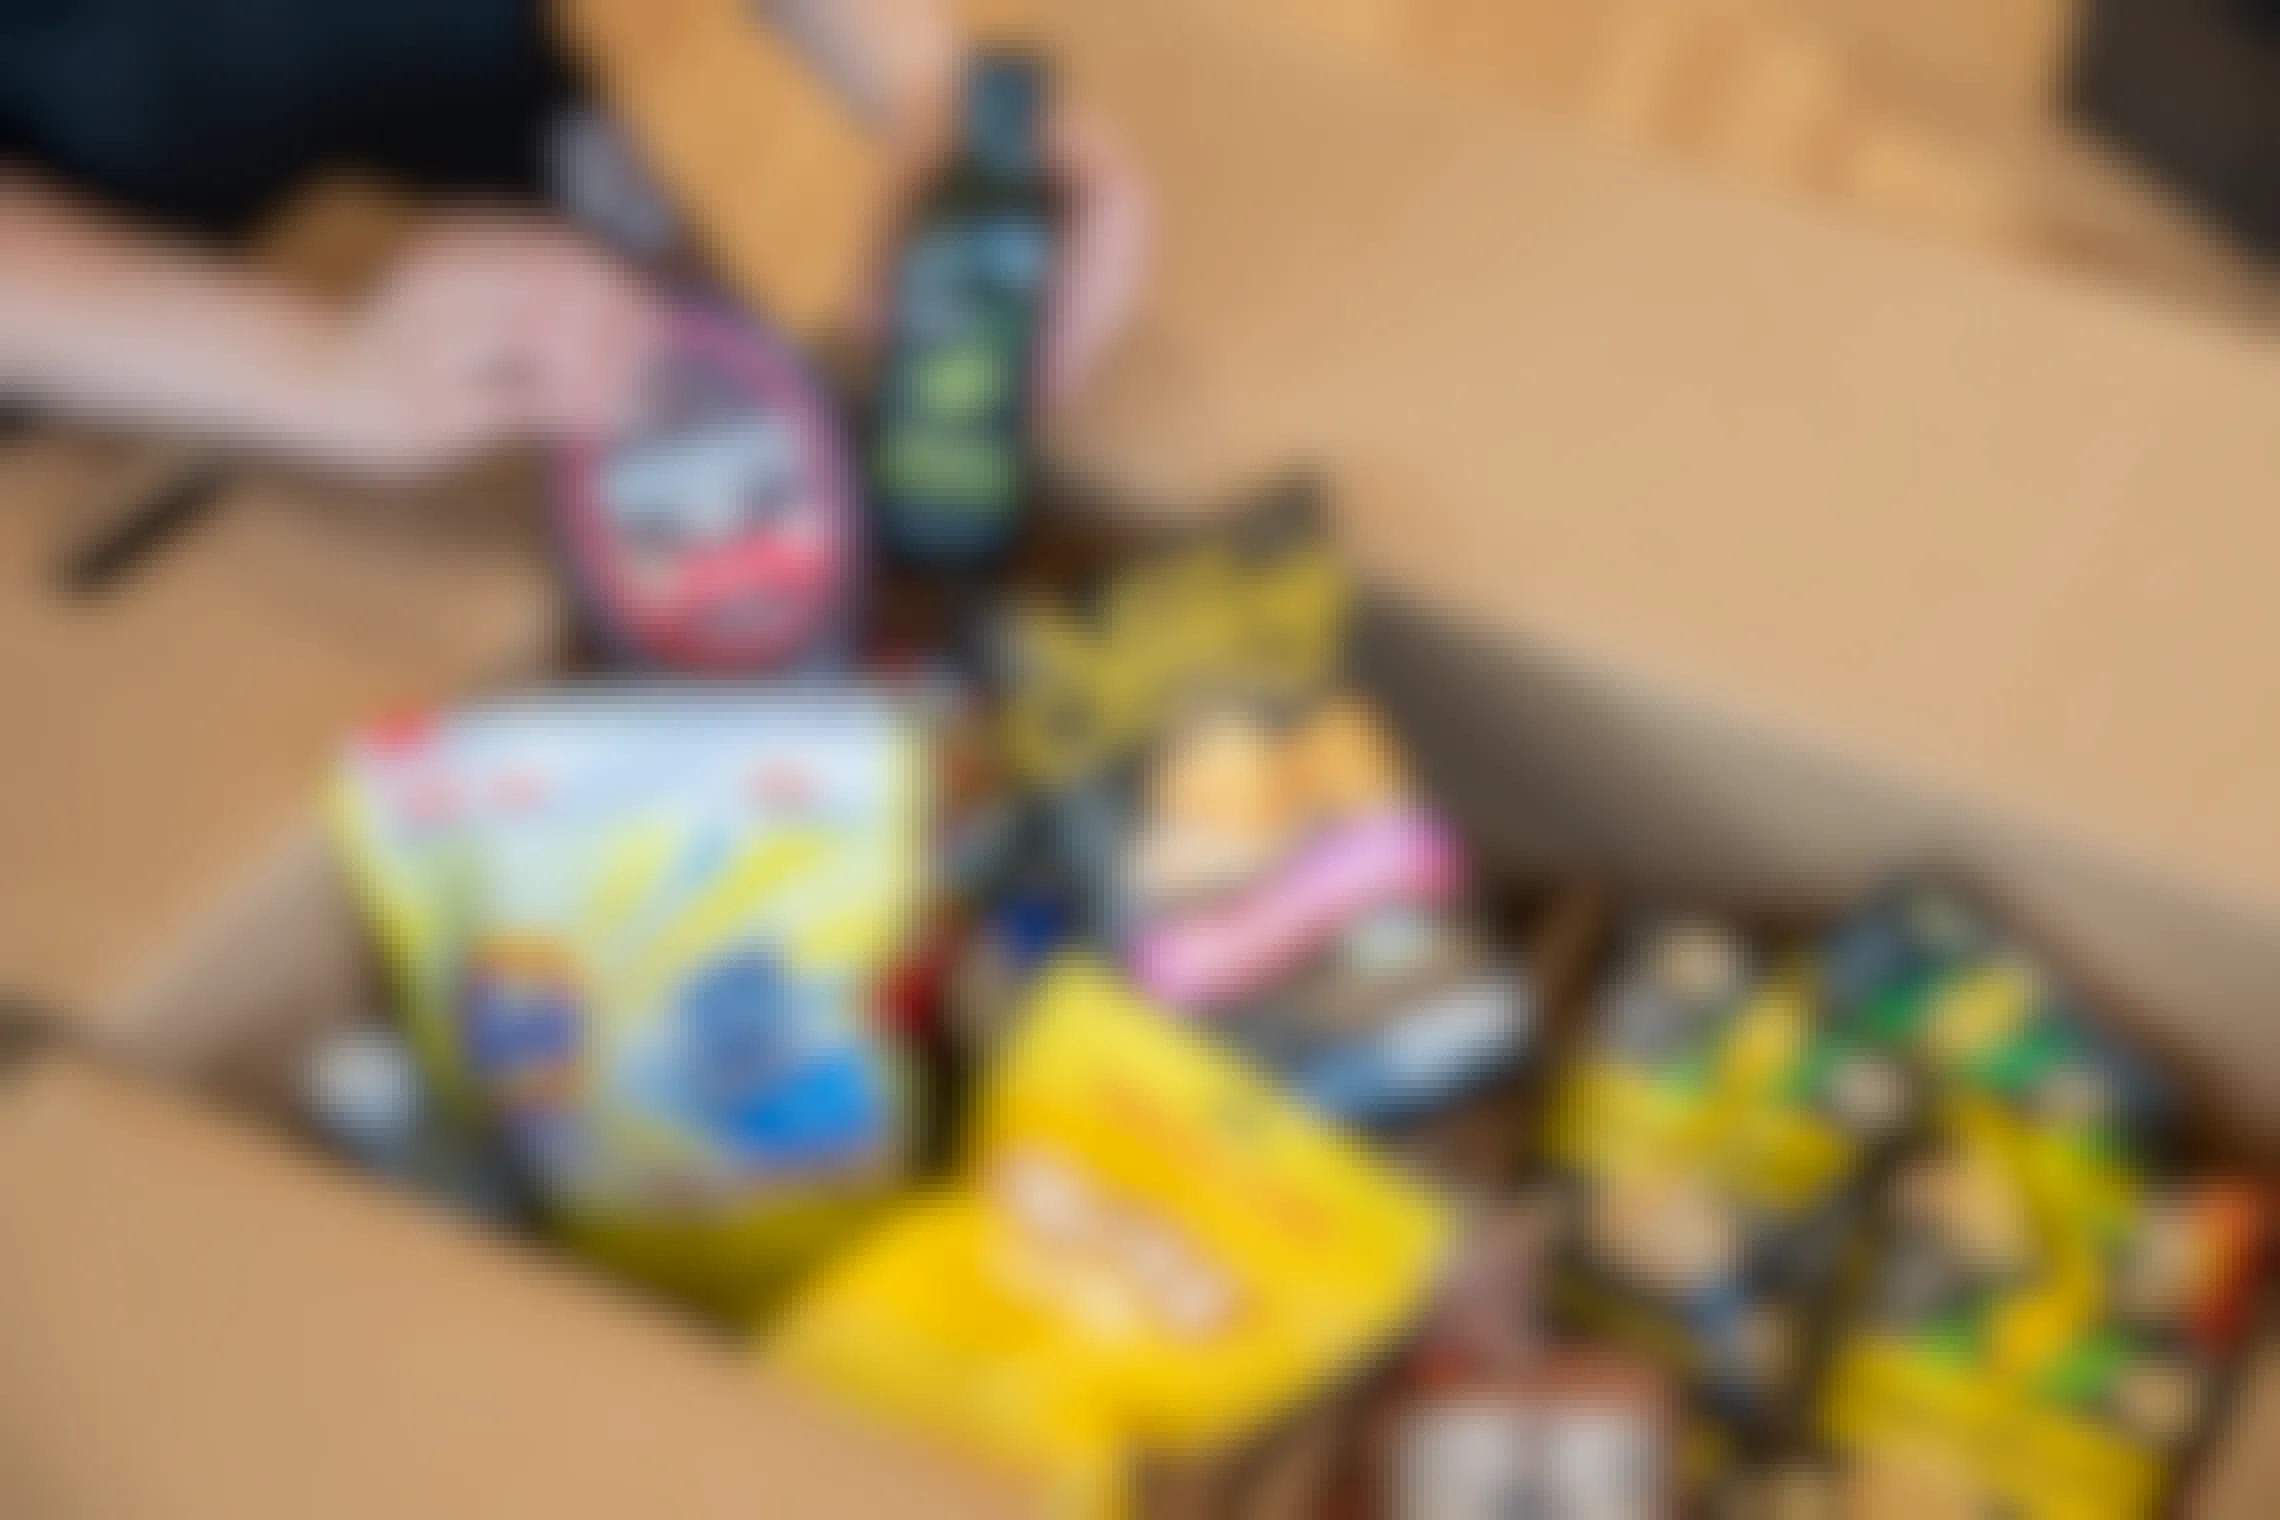 A person's hands holding up Hershey's chocolate syrup and Amazon Fresh Italian Olive Oil above a box of various groceries, including Stacy's Pita Chips, Halls cough drops, Smartfood Popcorn, and Tide Pods, ordered using Amazon Pantry.